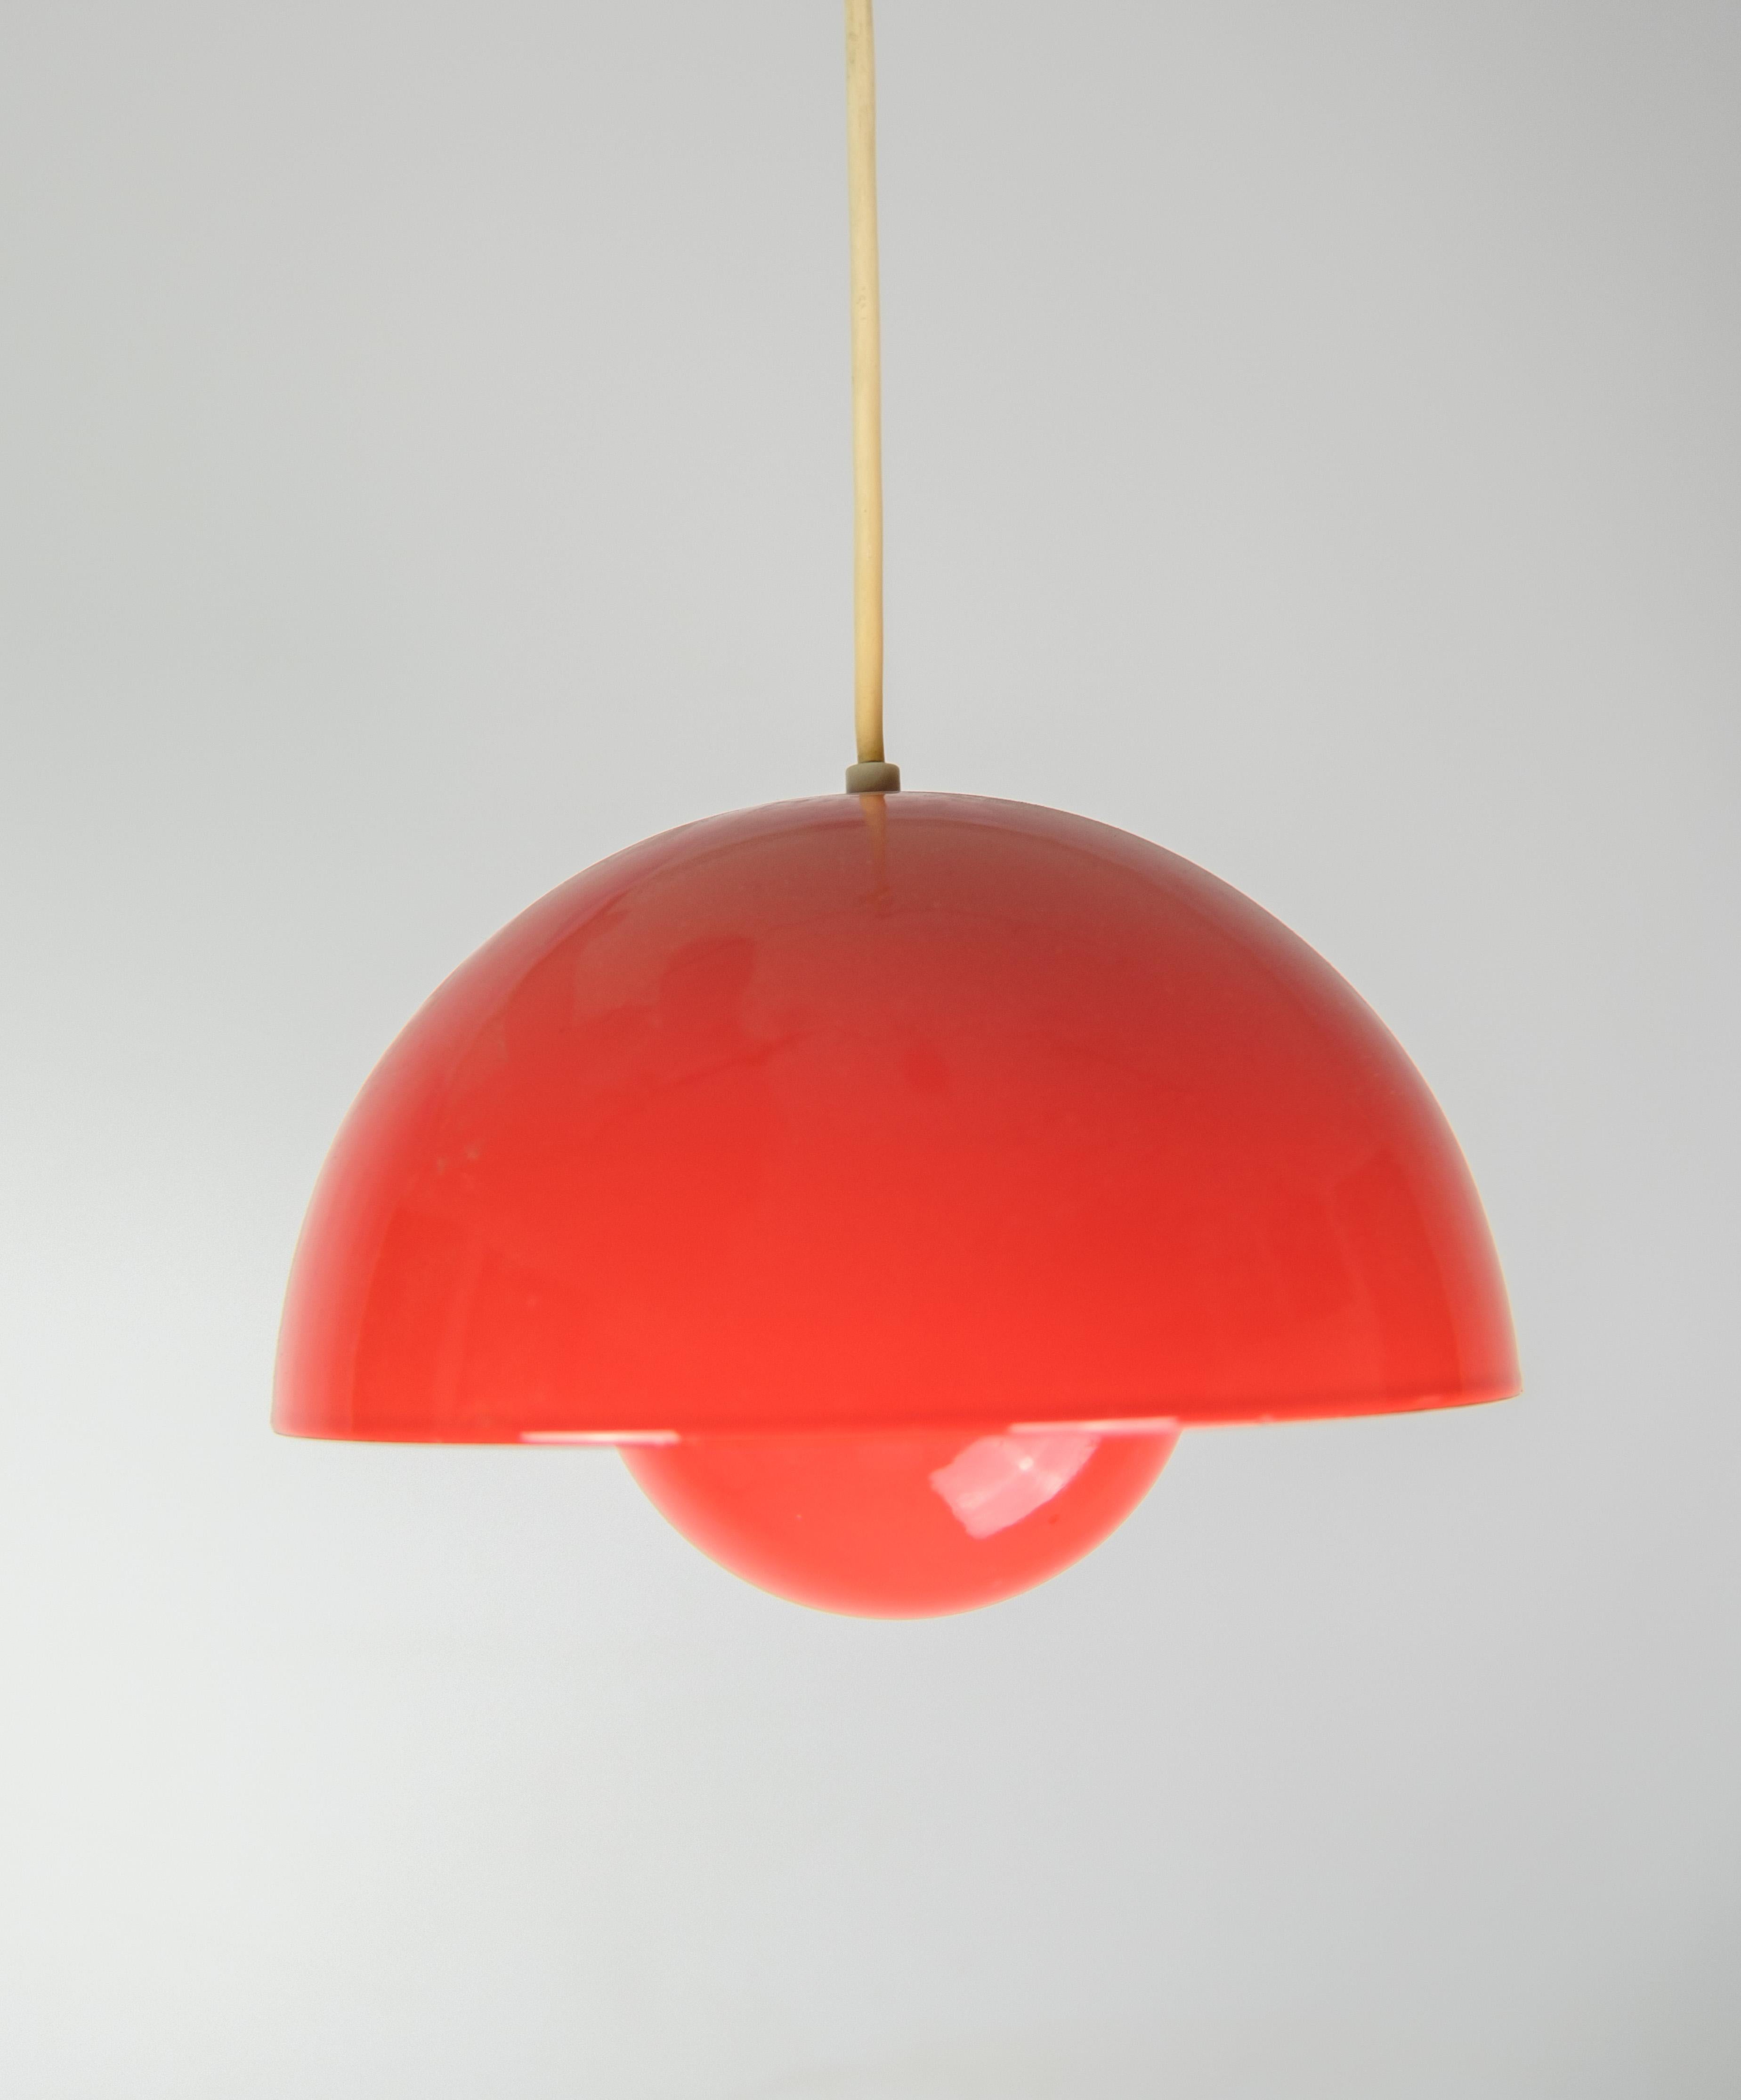 Flowerpot ceiling lamp, designed by Verner Panton (1926-1998) VP1 in orange color from the 1970s.